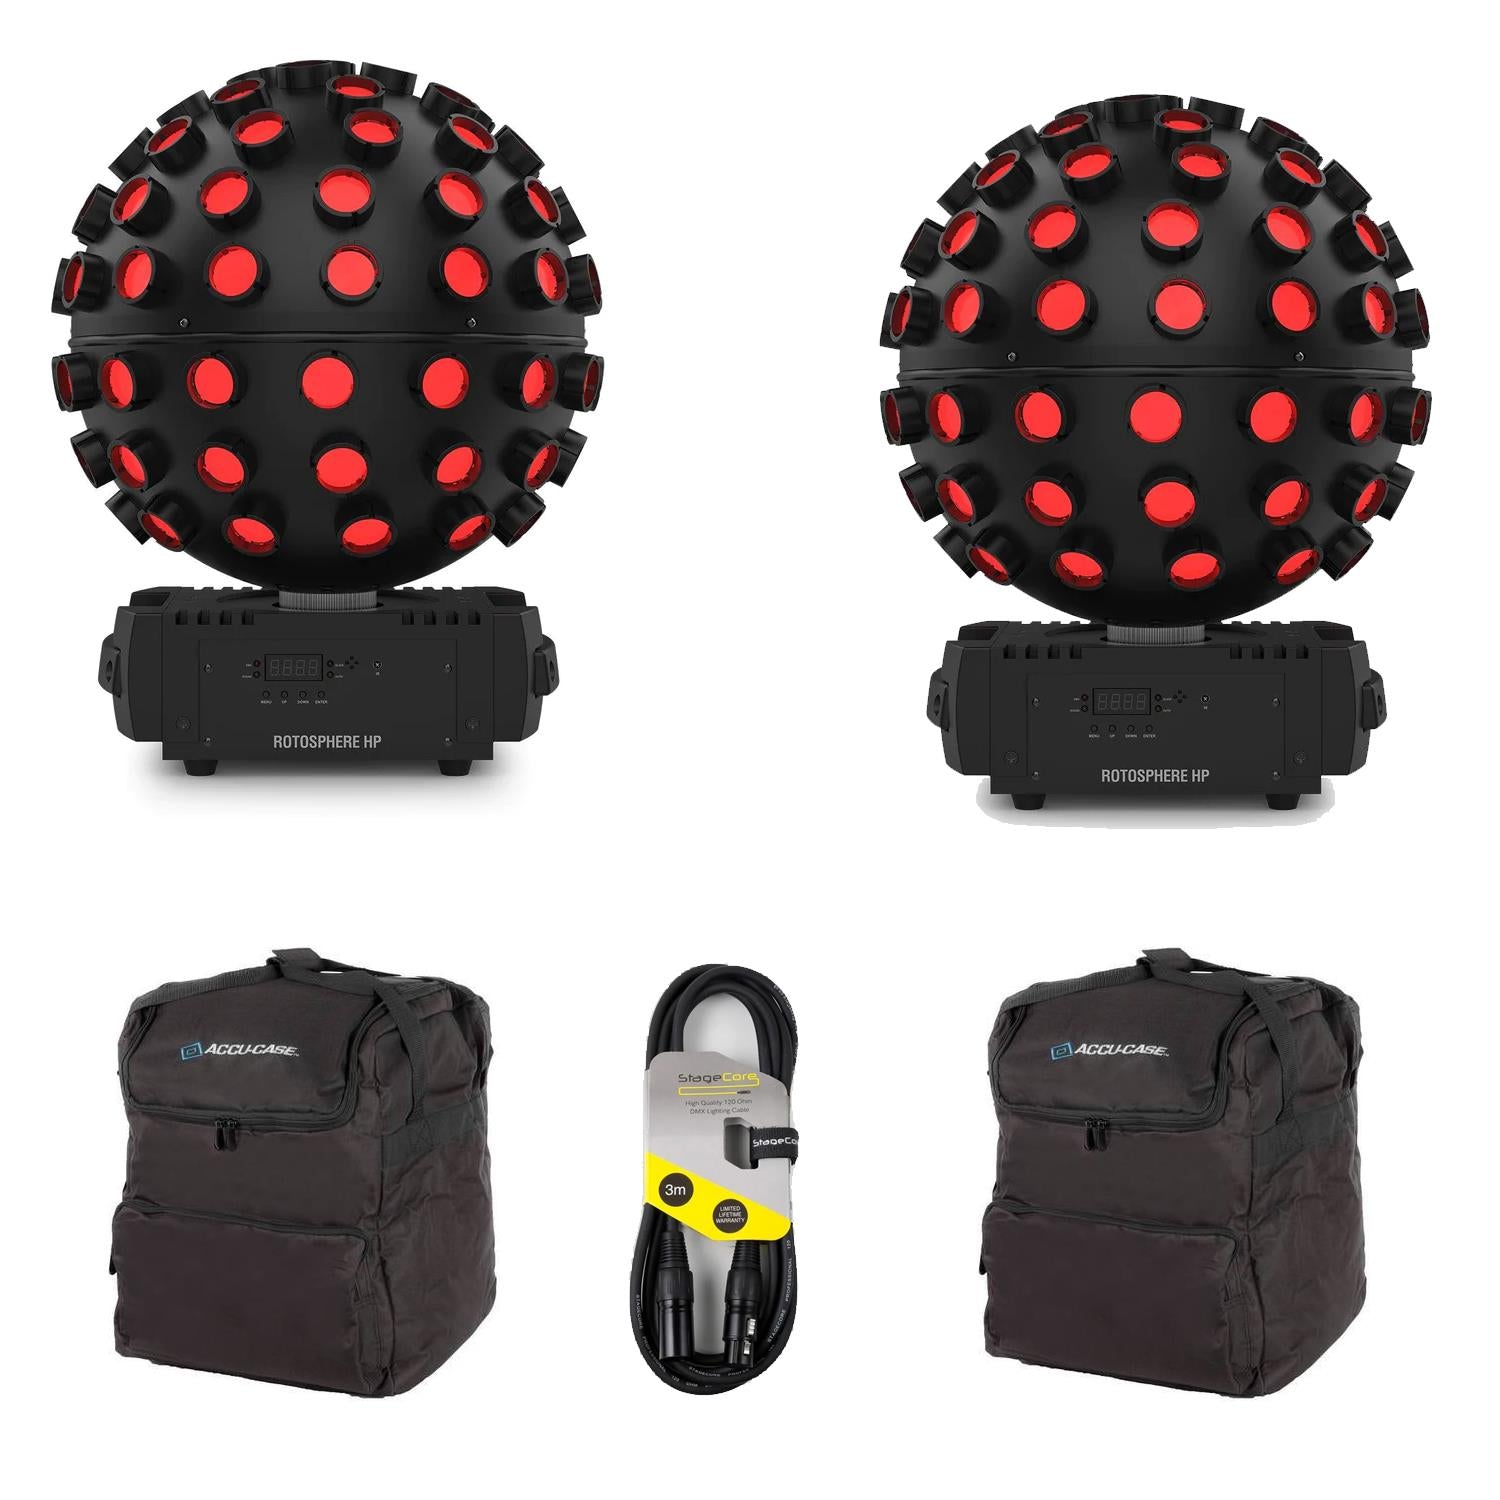 2 x Chauvet DJ Rotosphere HP Quad Colour Sphere Mirror Ball with DMX Cable and Carry Bags